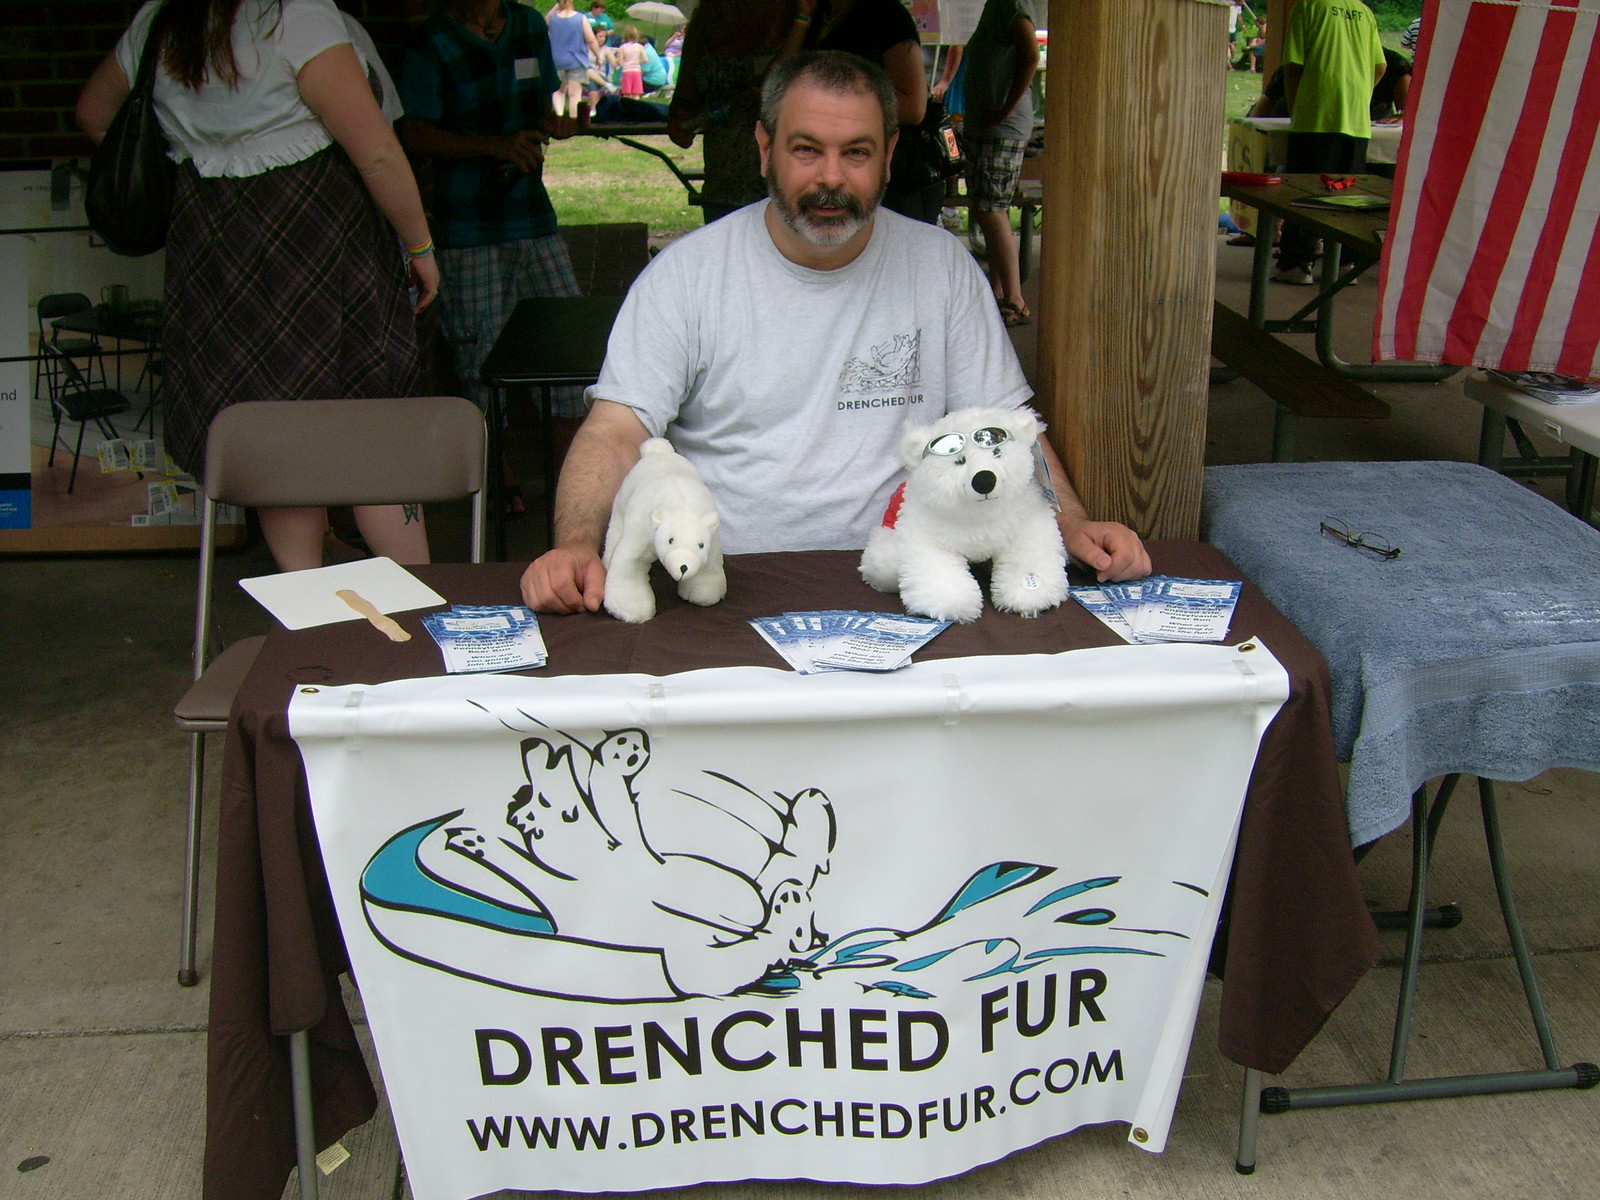 Chris at Drenched Fur info table. Photo by James von Loewe